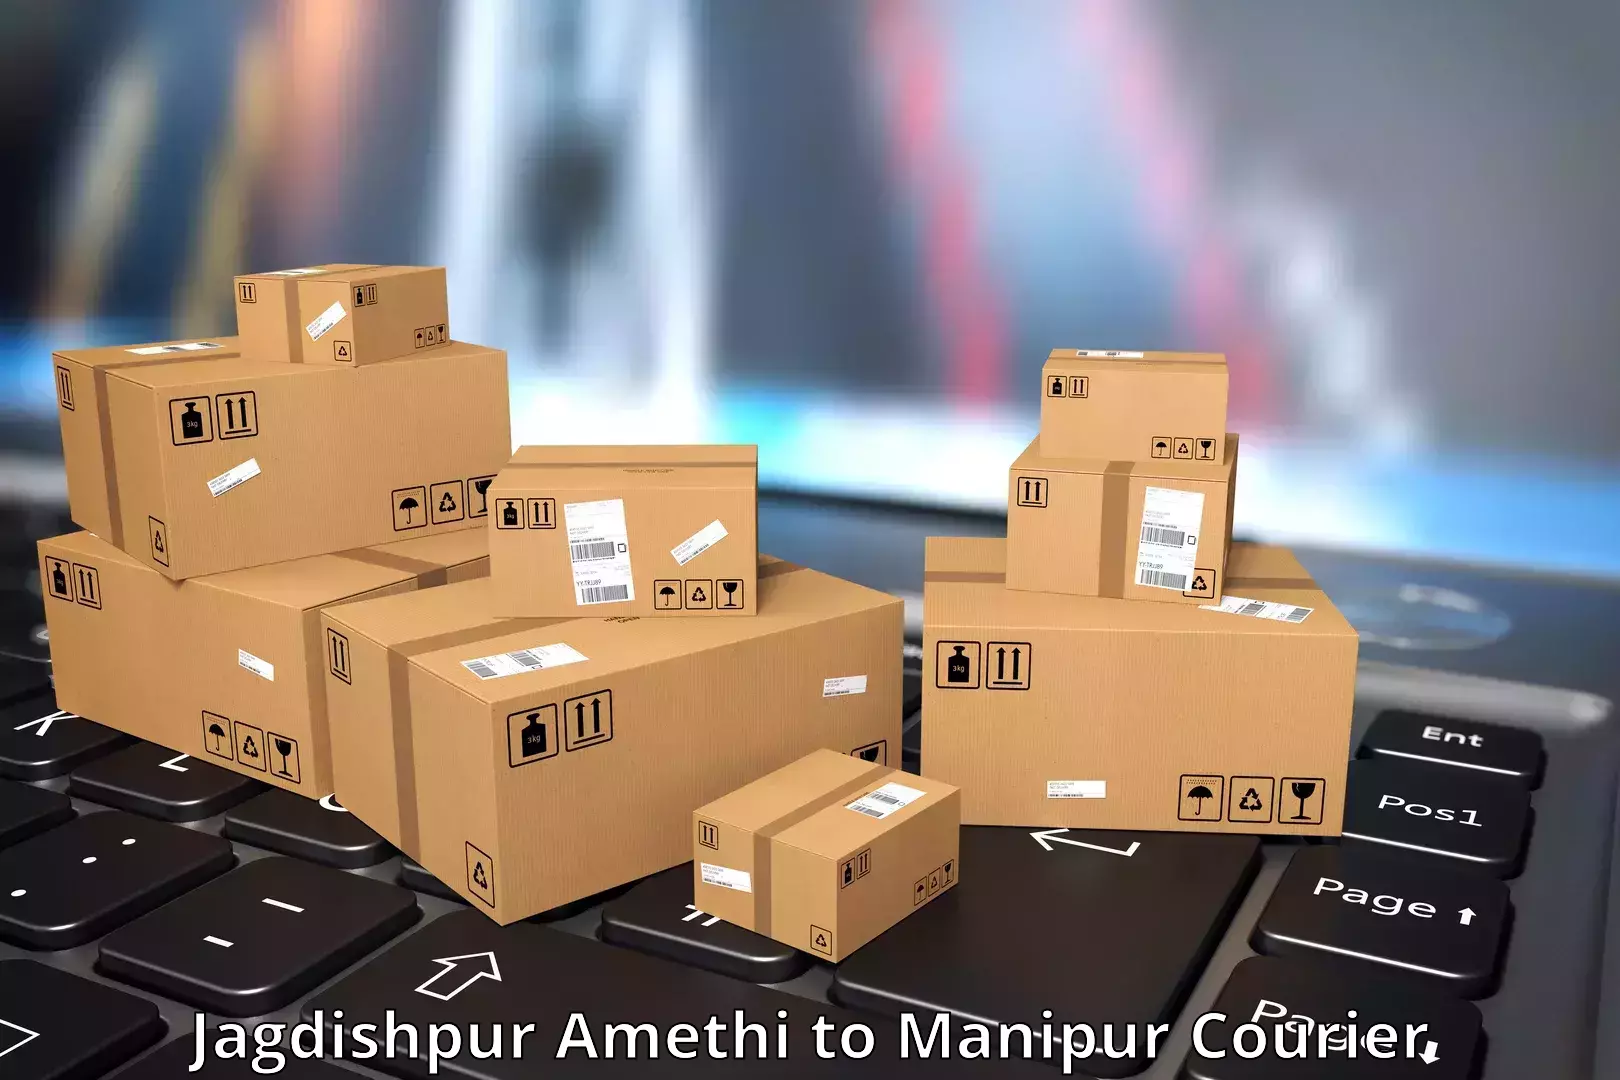 Reliable delivery network Jagdishpur Amethi to Manipur